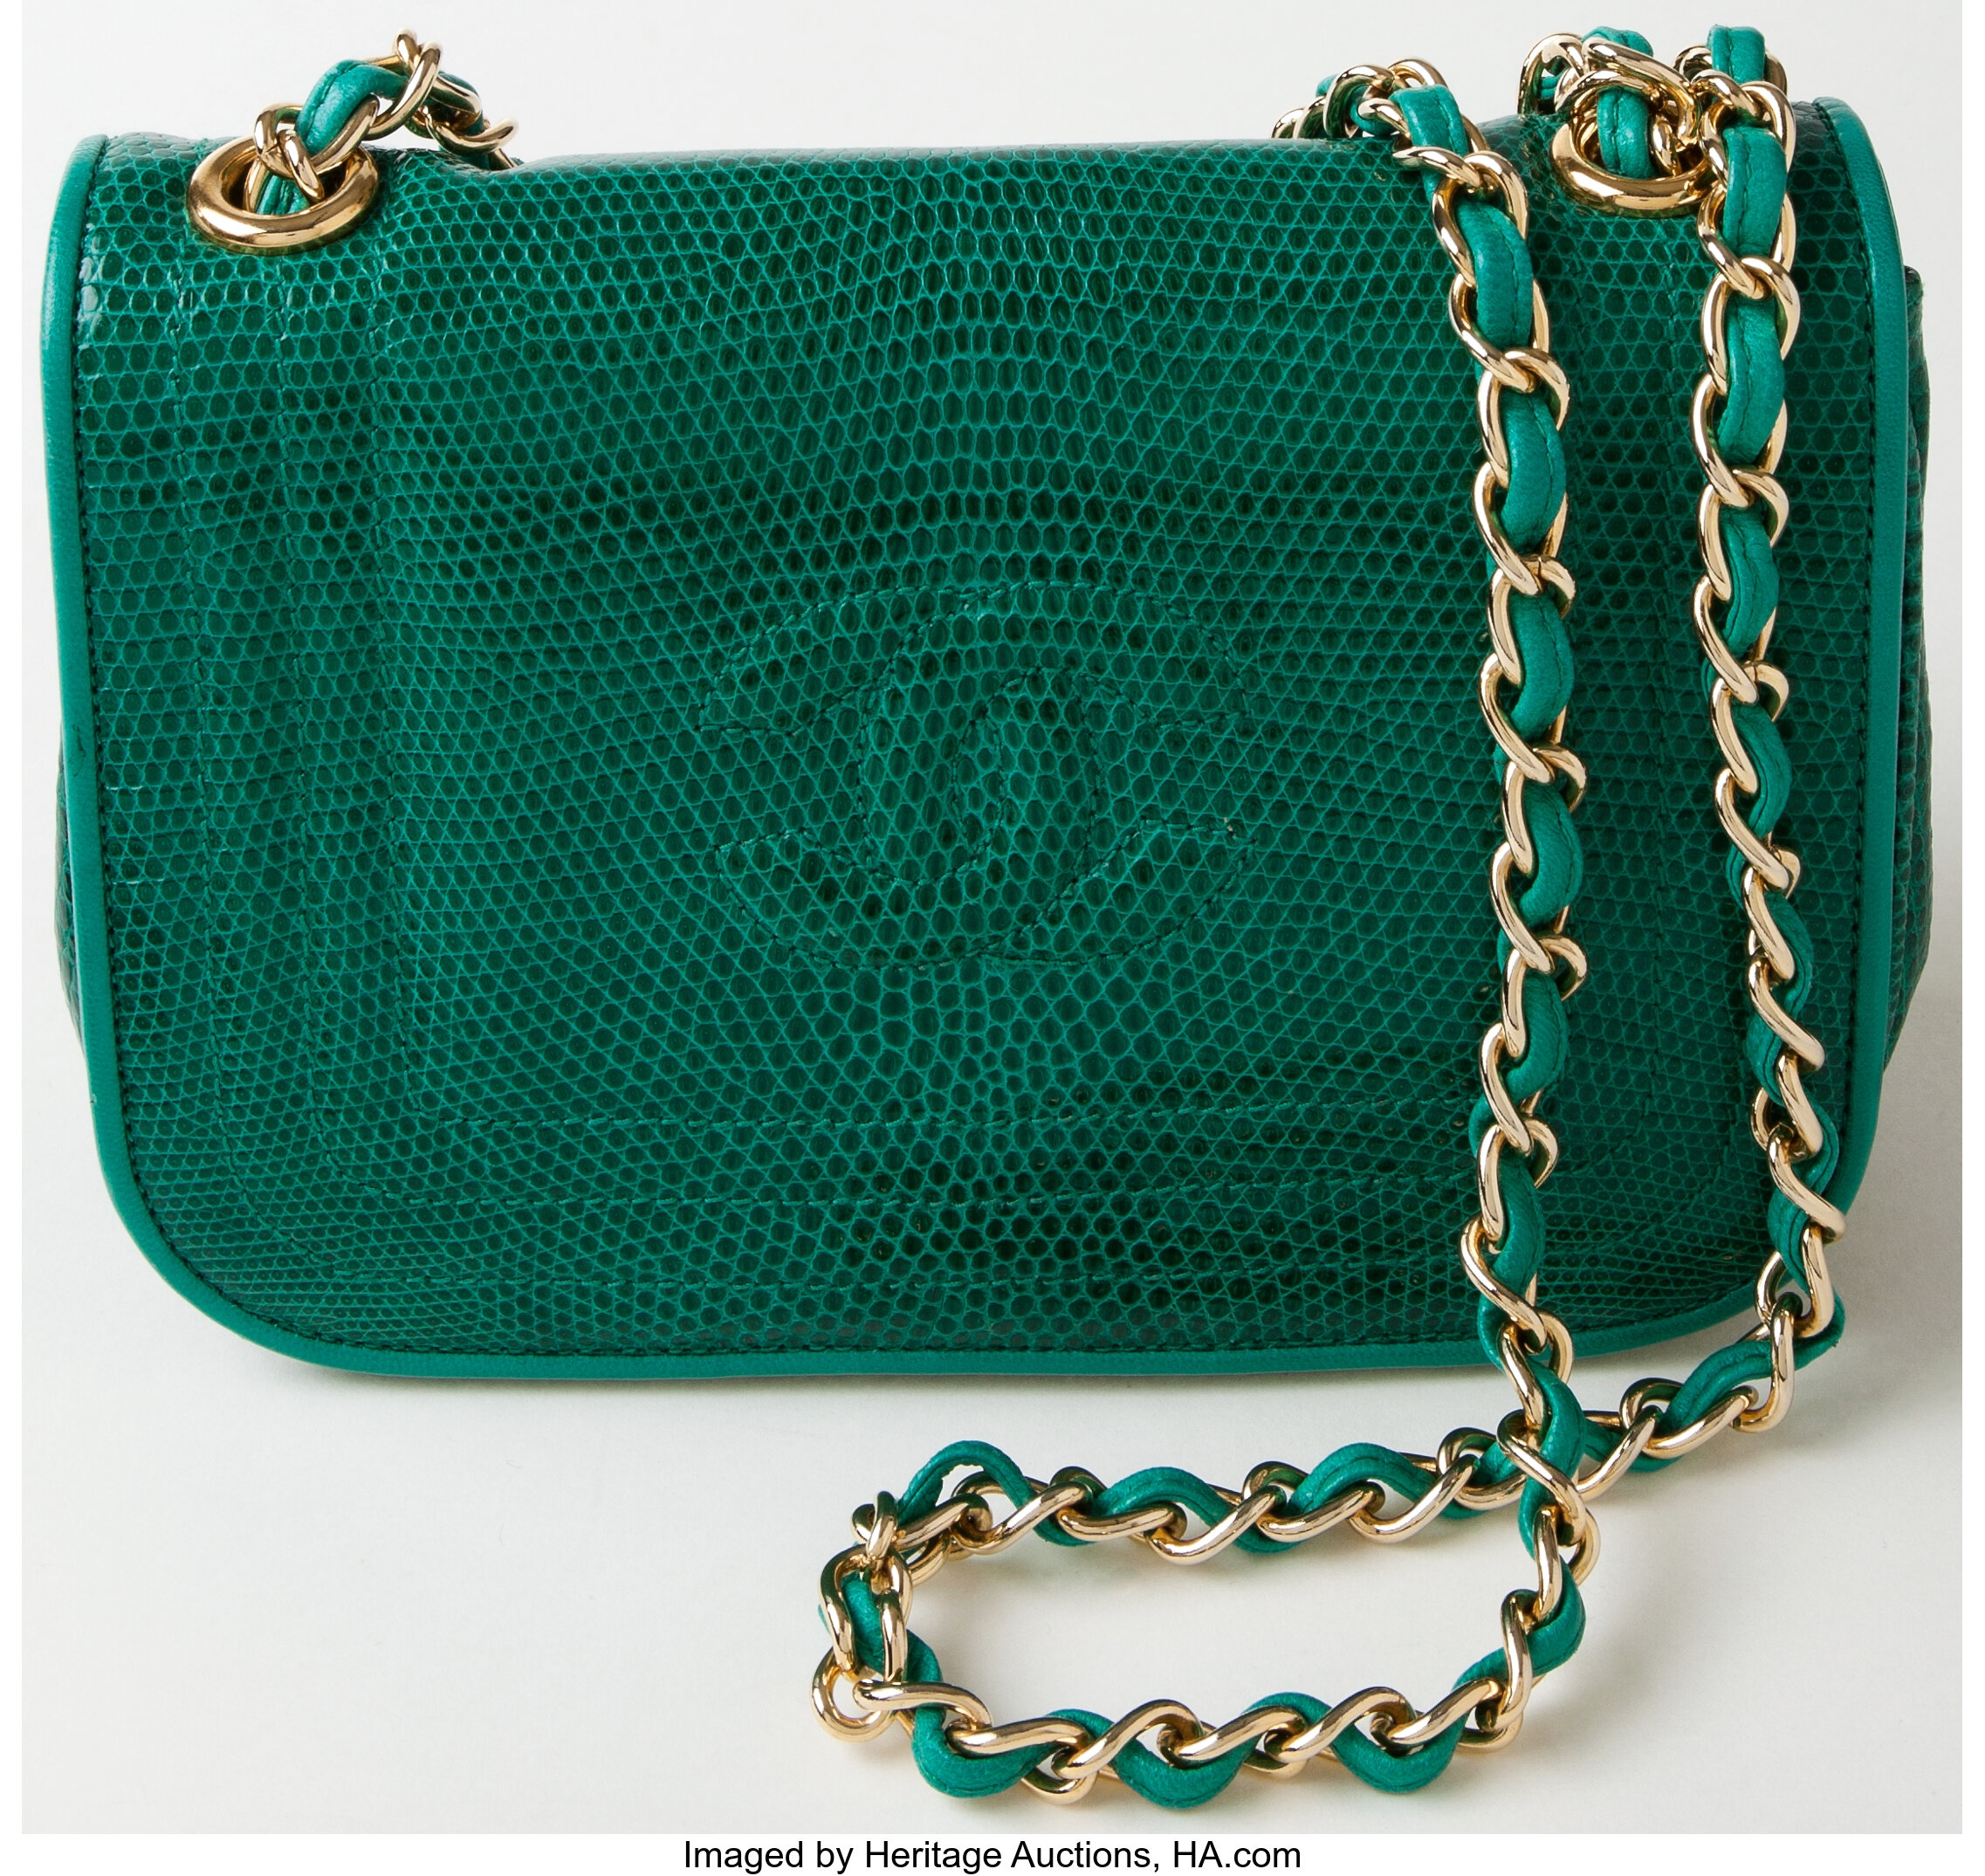 Heritage Vintage: Chanel Green Lizard Flap Bag with Gold Hardware., Lot  #77006